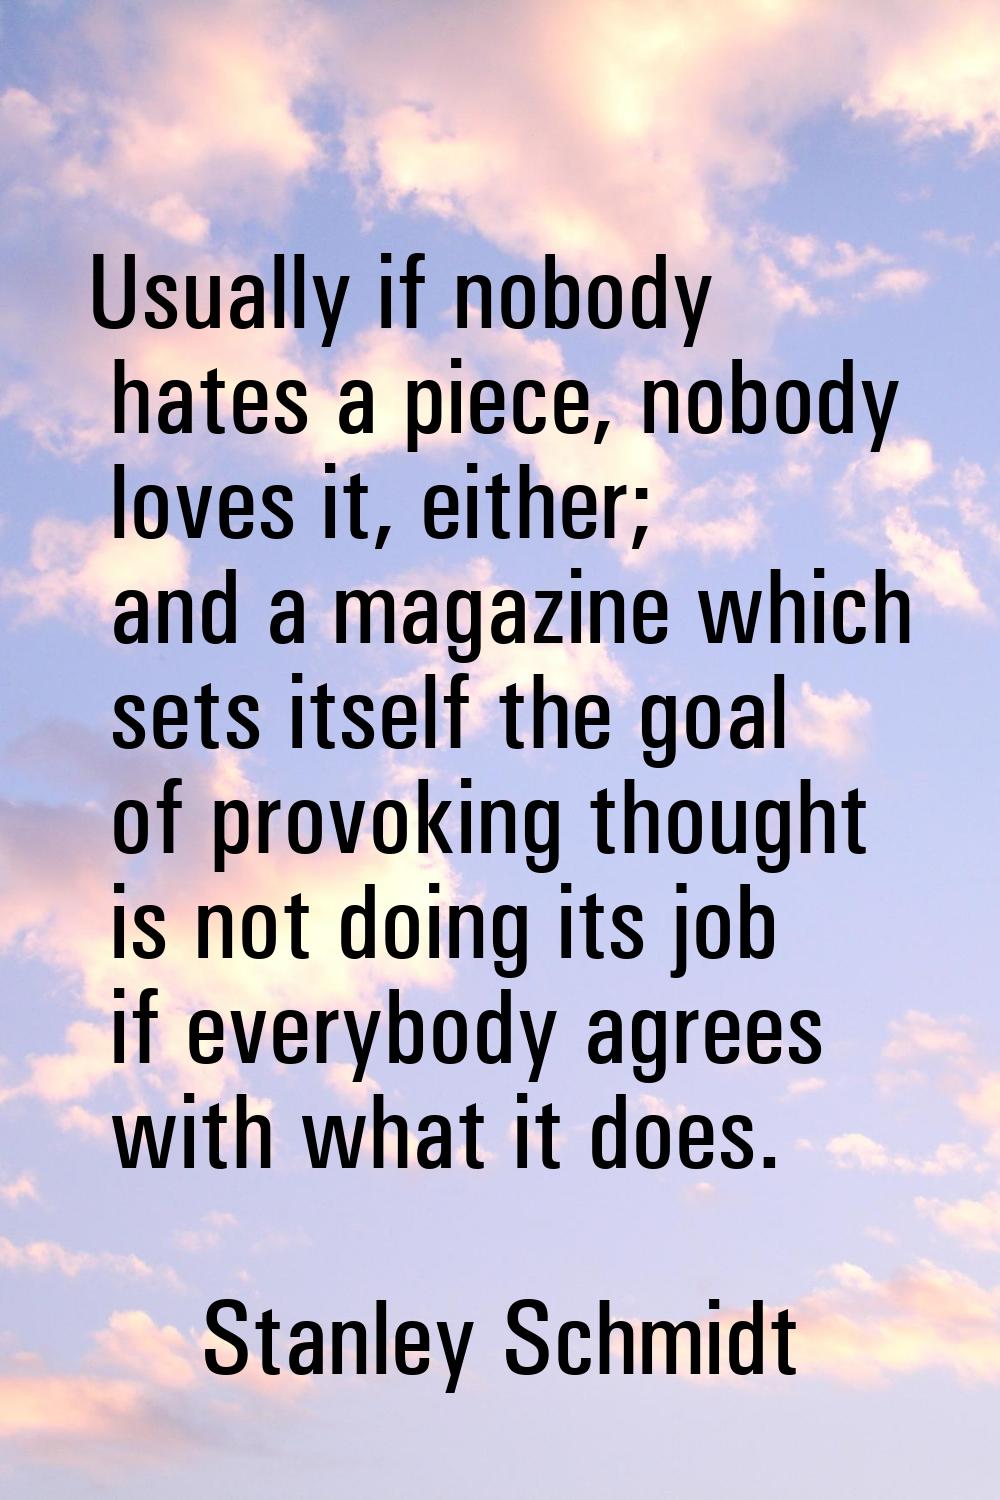 Usually if nobody hates a piece, nobody loves it, either; and a magazine which sets itself the goal